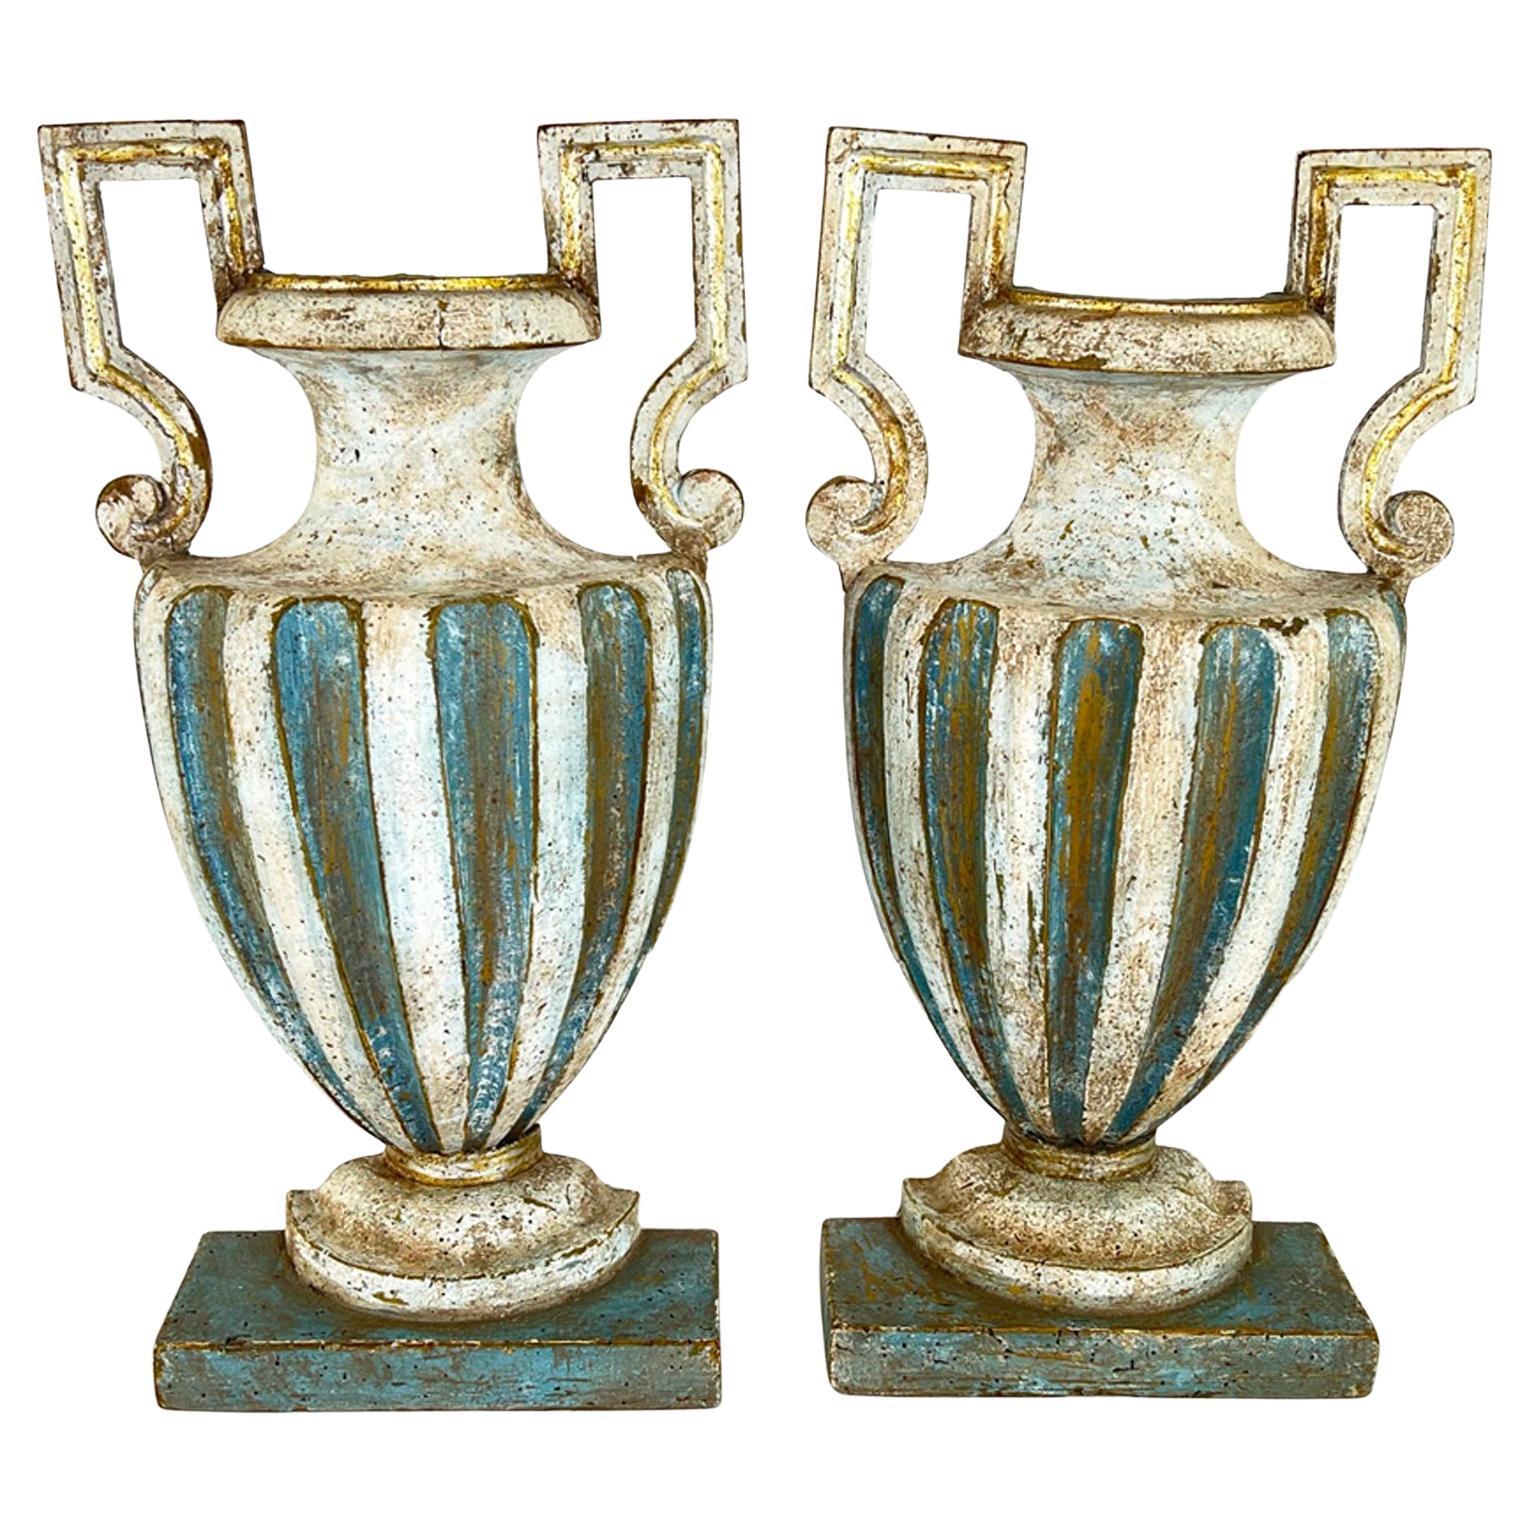 Pair of 18th Century Half-Urn Carved Wood Decorations